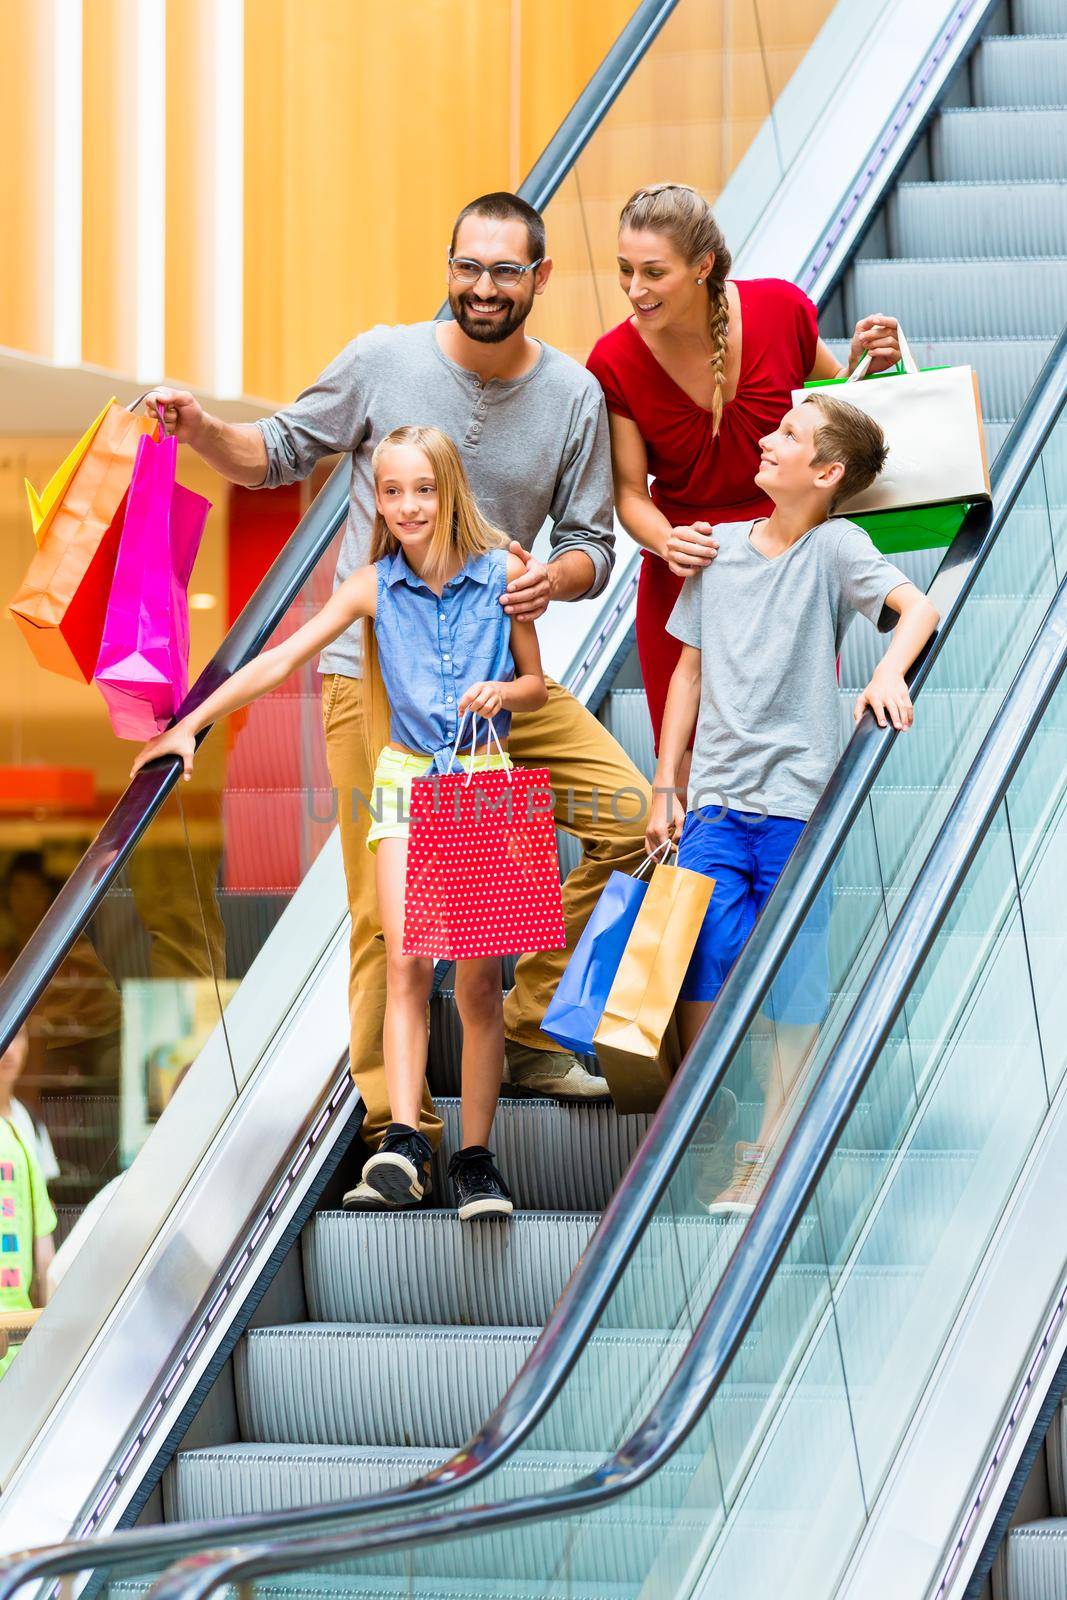 Family in shopping mall on escalators with bags by Kzenon